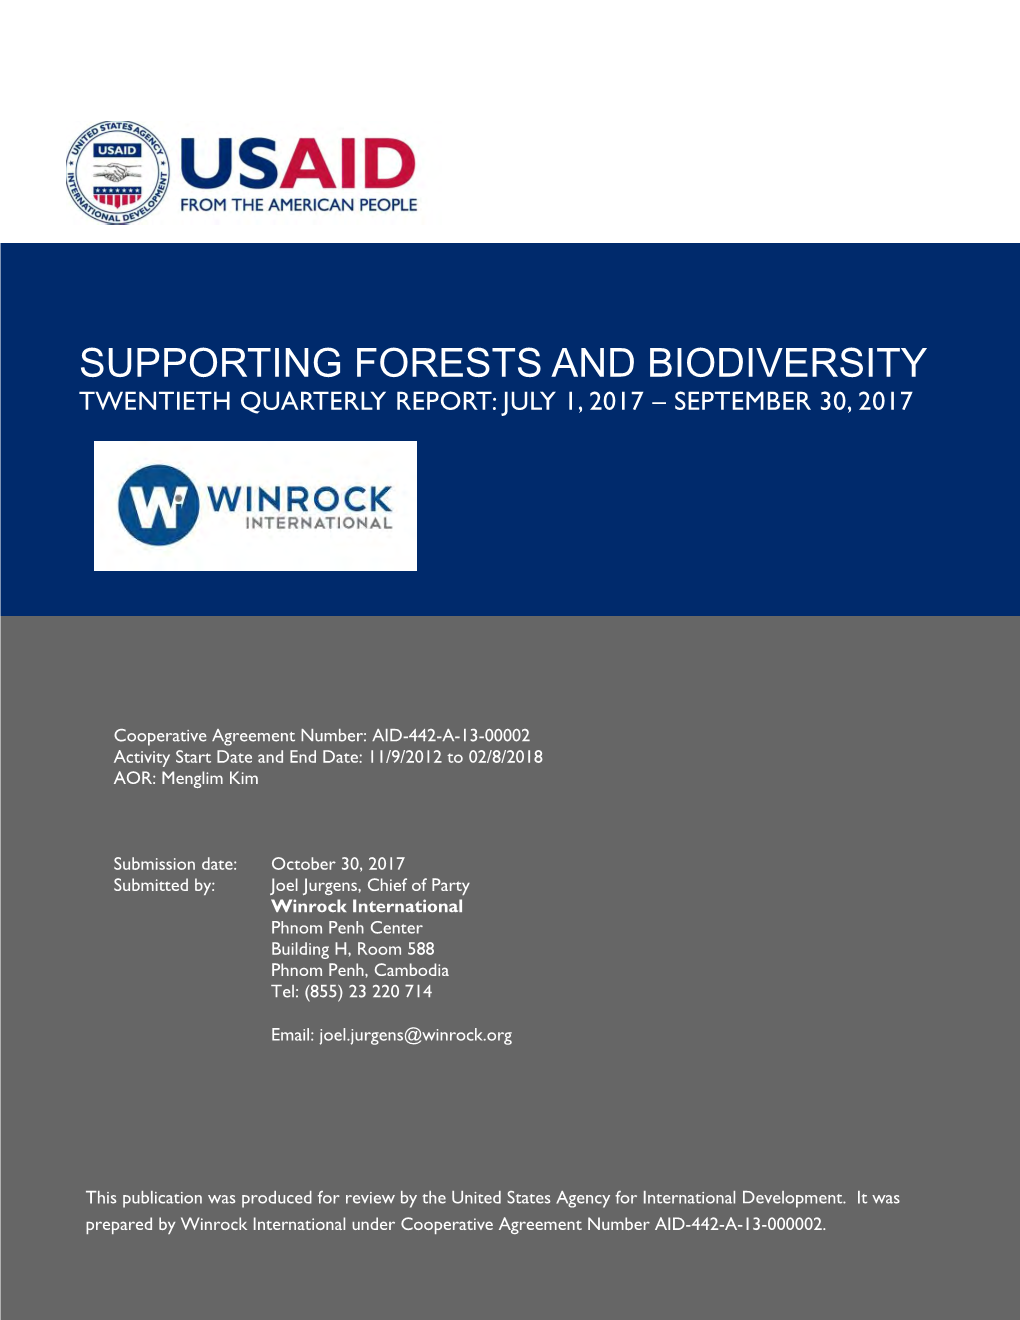 Supporting Forests and Biodiversity Twentieth Quarterly Report: July 1, 2017 – September 30, 2017